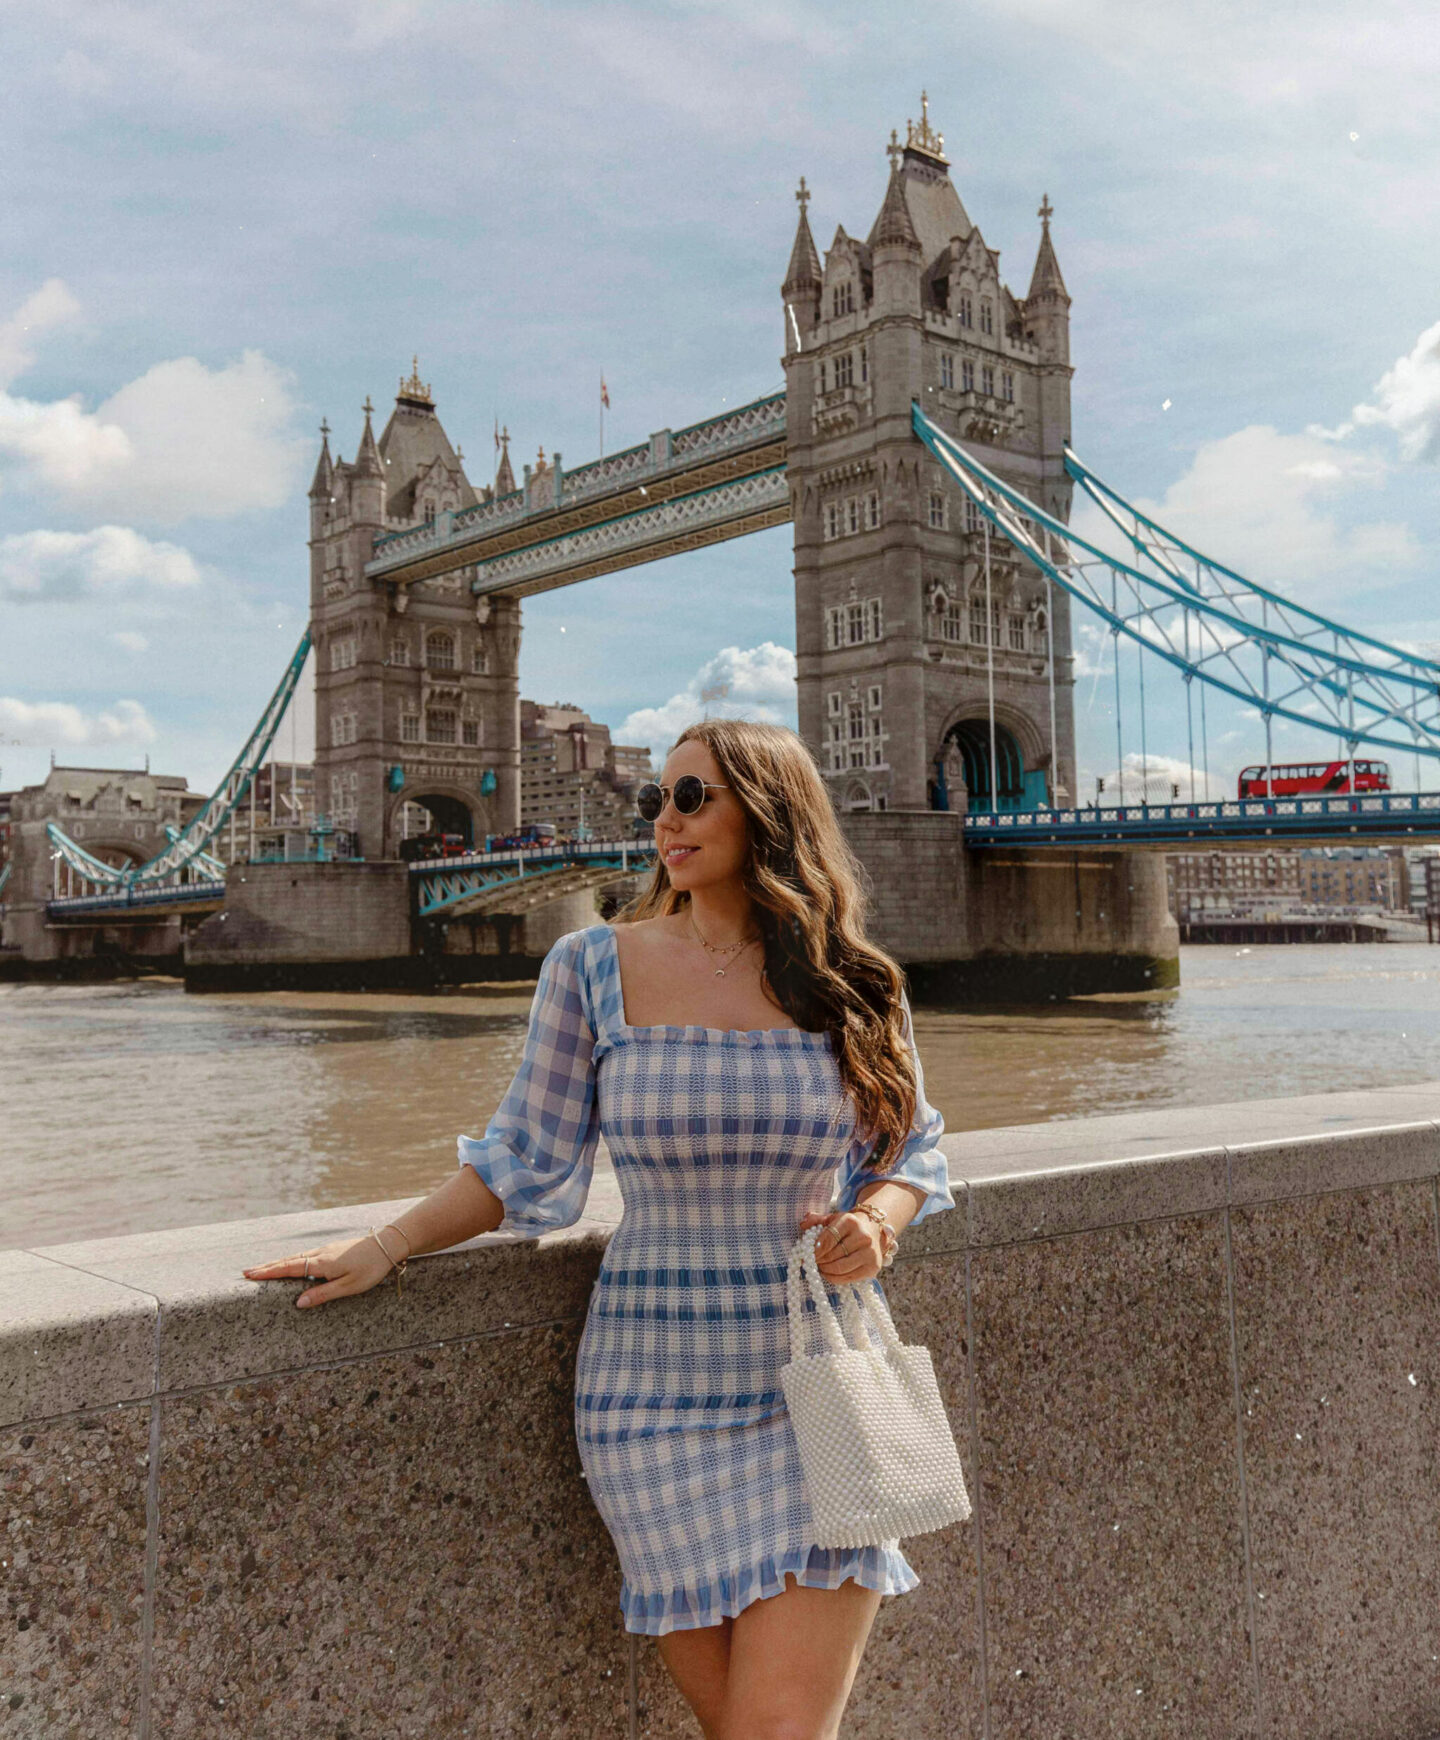 kelseyinlondon moving to london guide how to move to london tips kelsey heinrichs tower bridge